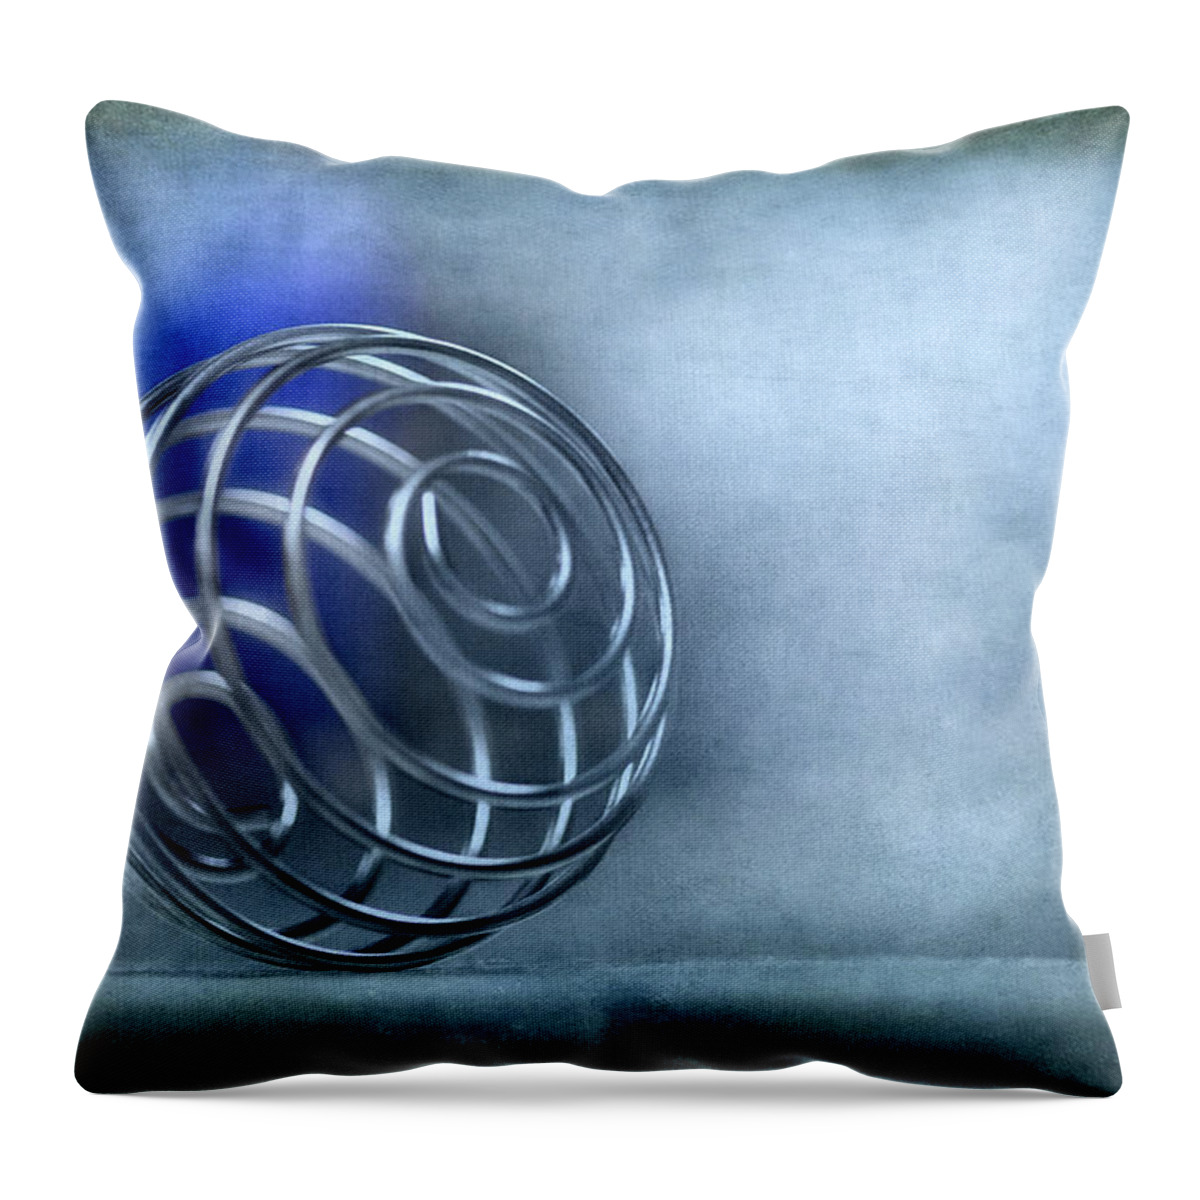 Spiral Throw Pillow featuring the photograph Spiral Mystery by Evelina Kremsdorf